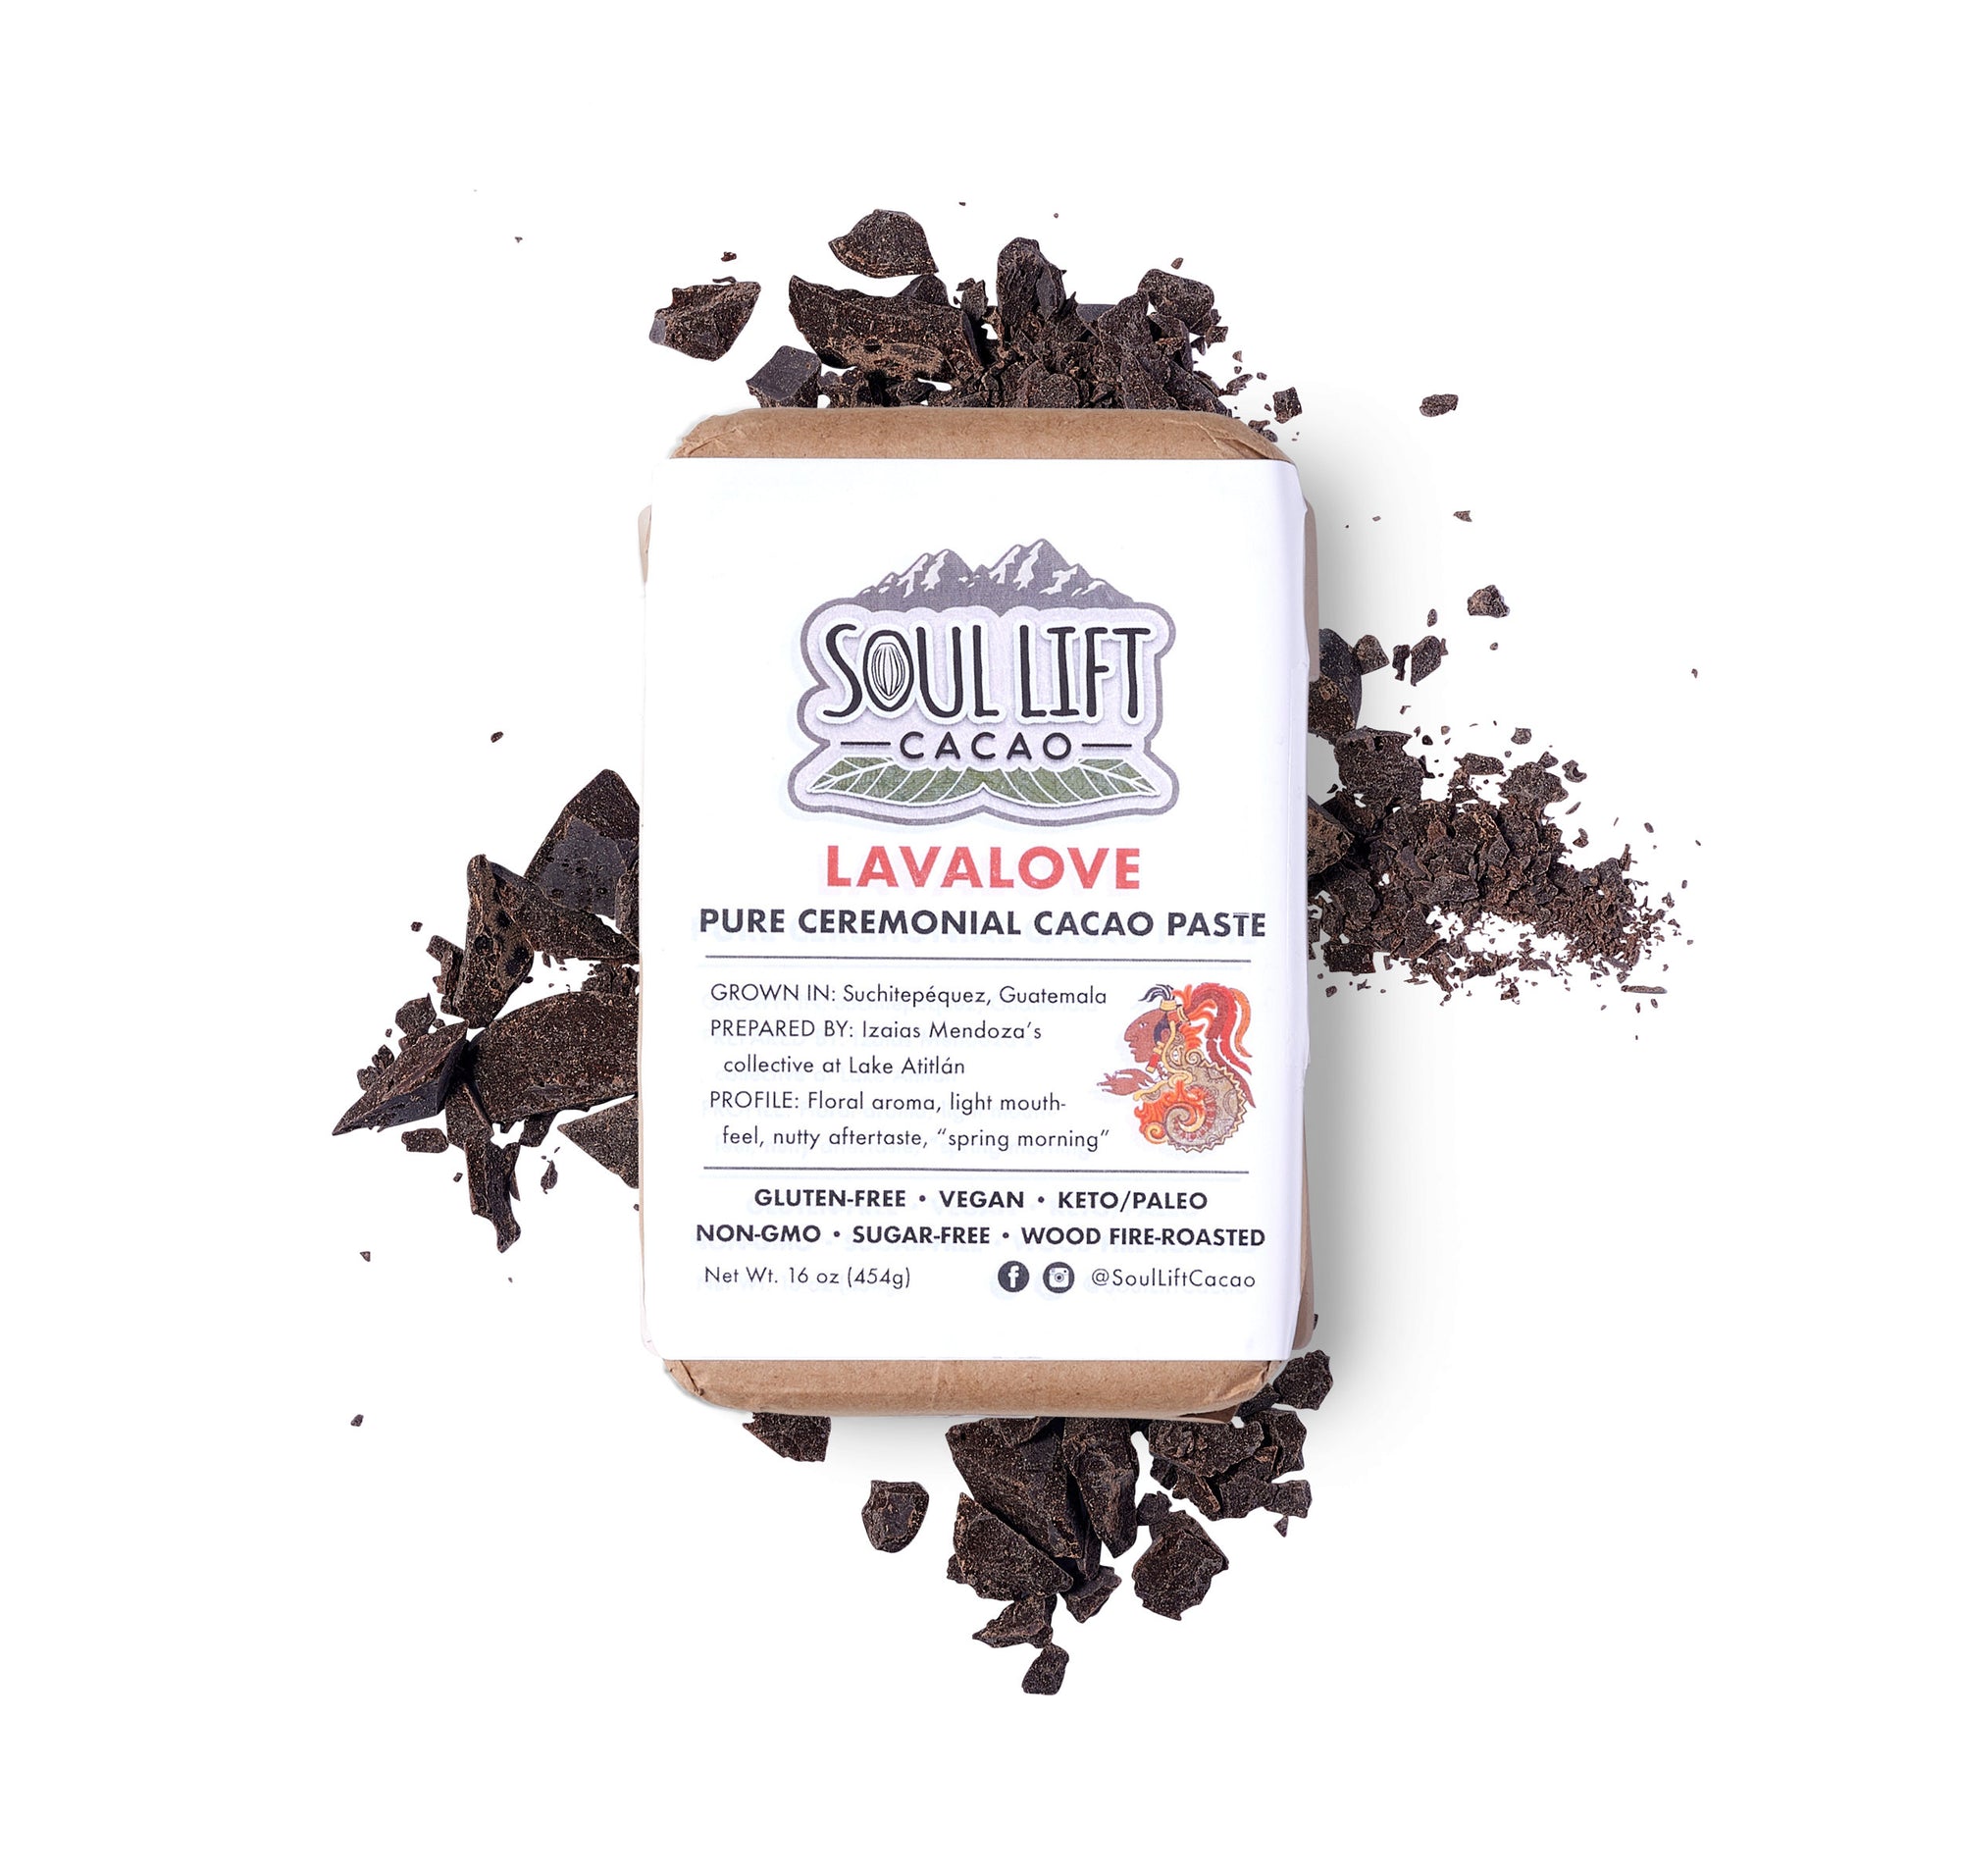 Lavalove 100% Pure Ceremonial Cacao Paste from Guatemala